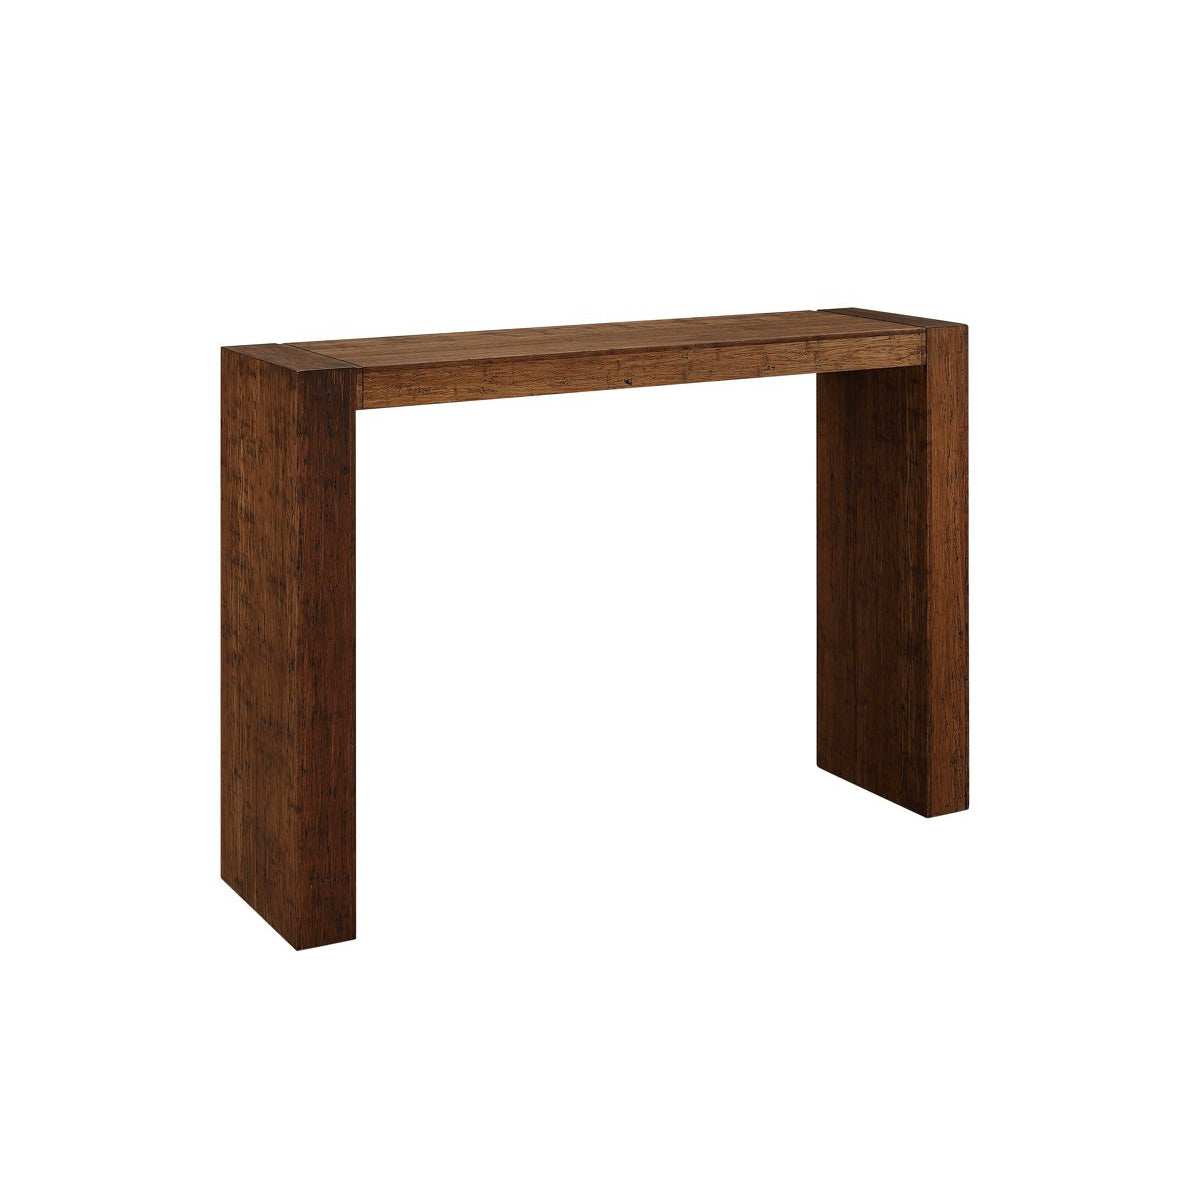 Greenington Sequoia Counter Height Table - Side Tables - Bamboo Mod - 1